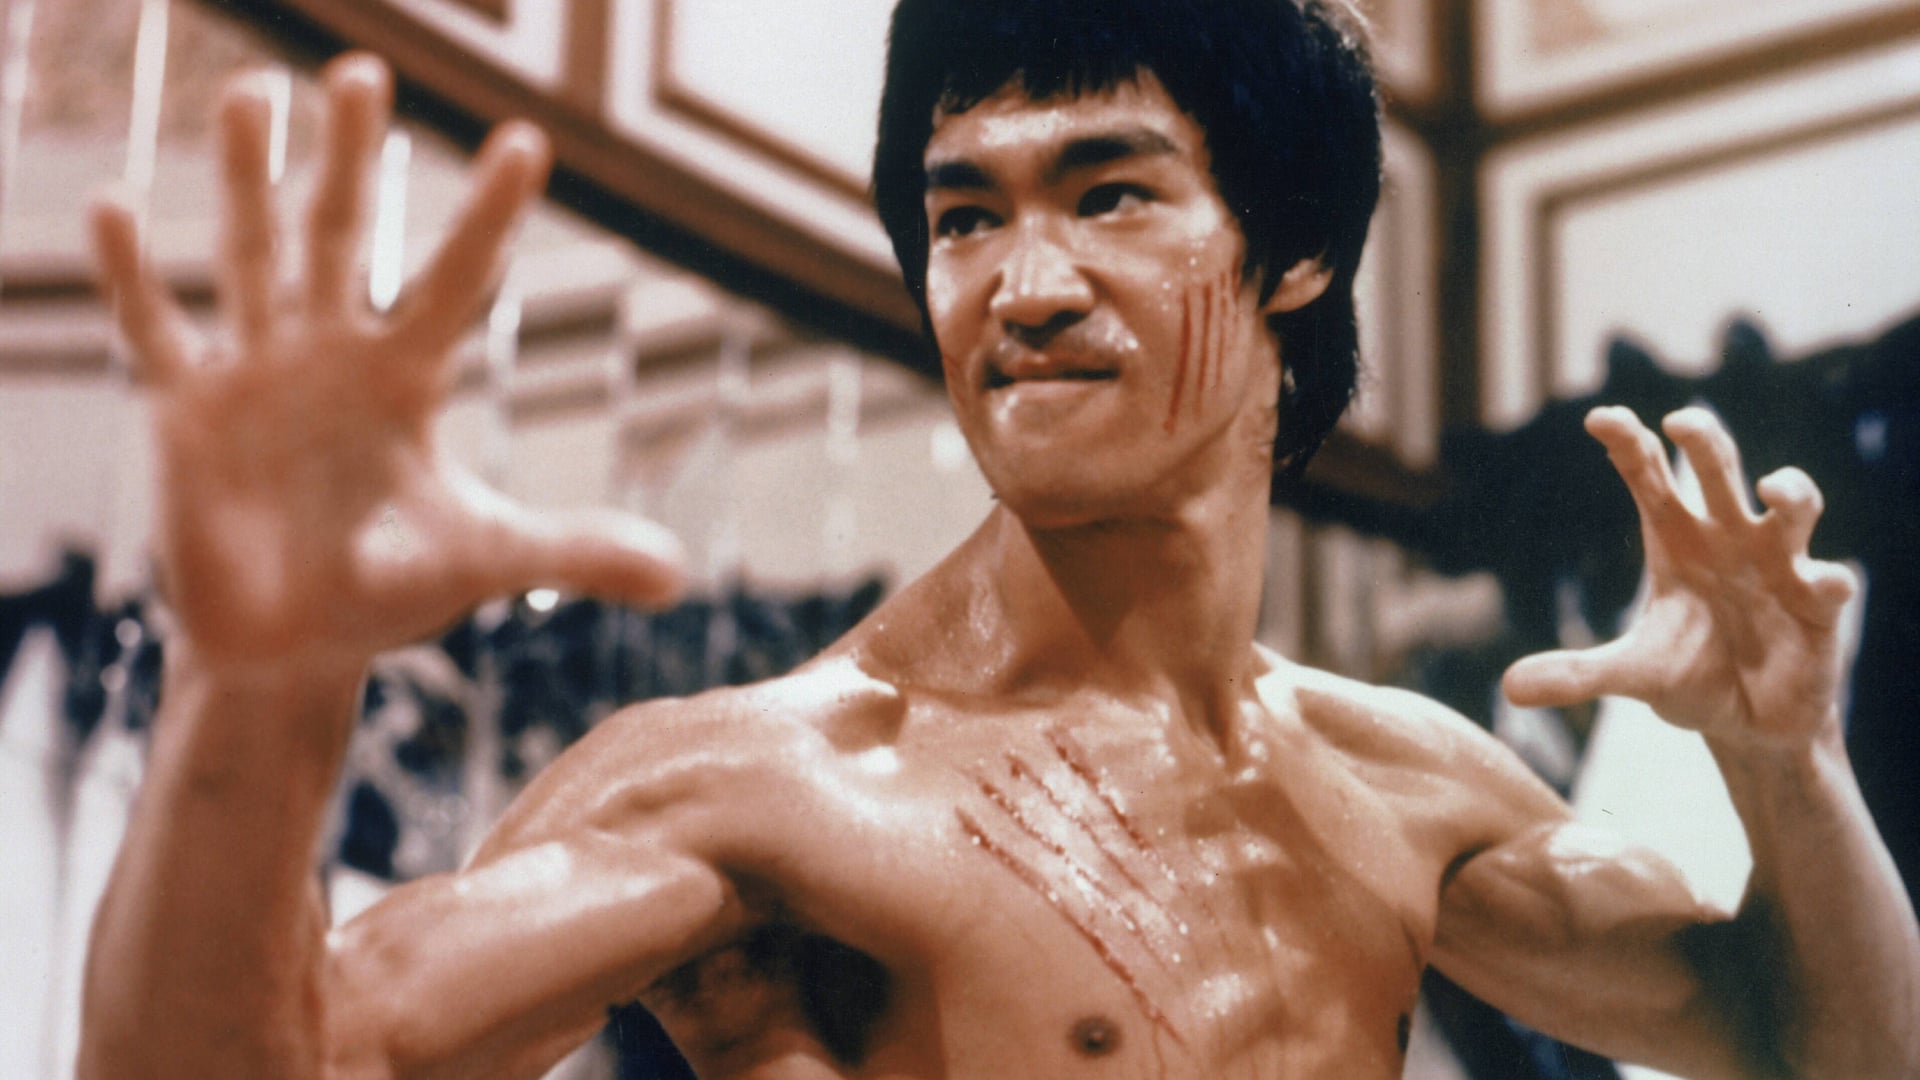 Enter the Dragon Picture